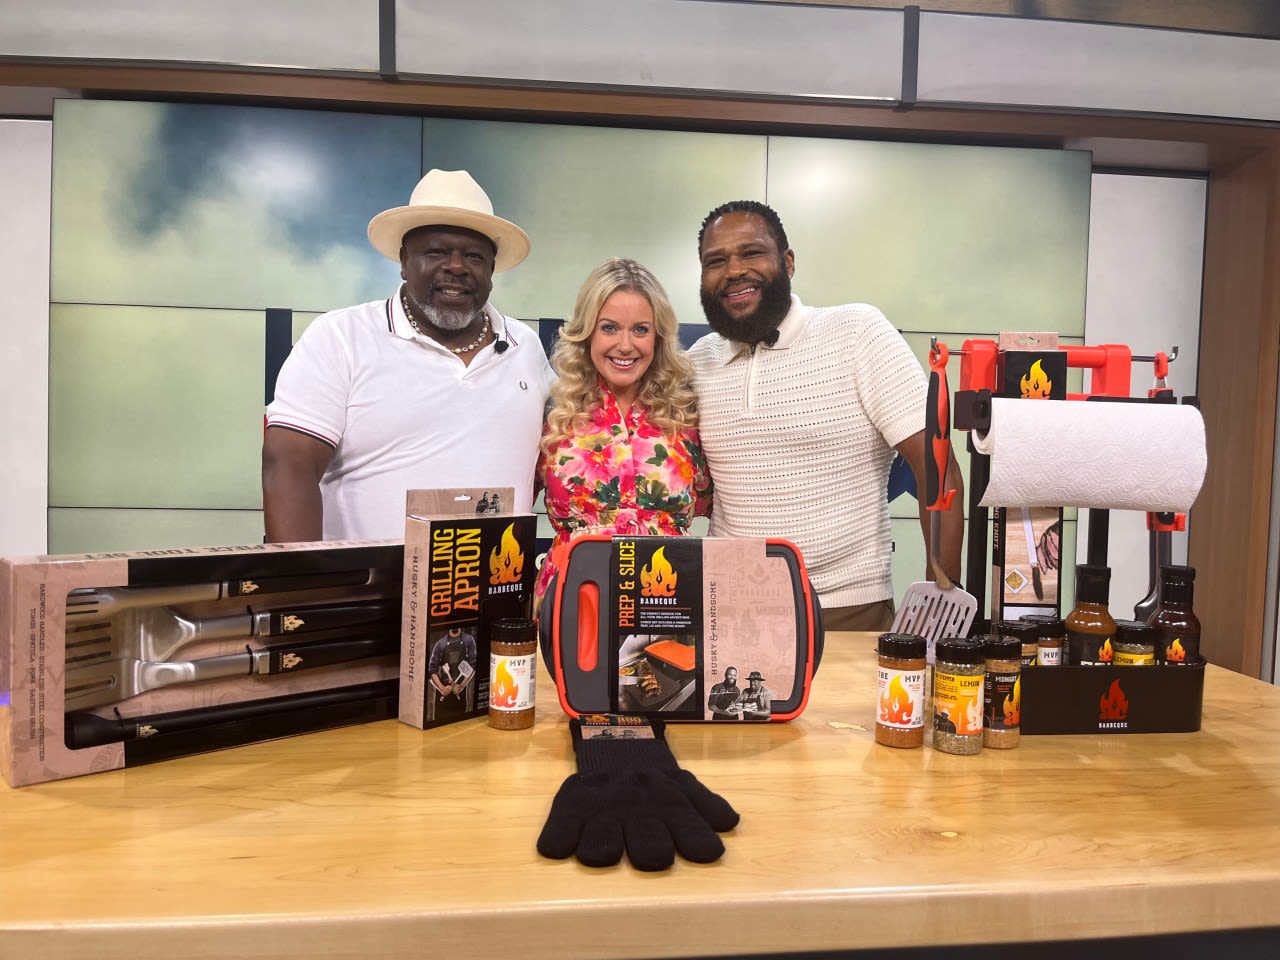 Cedric the Entertainer and Anthony Anderson on Houston Happens!